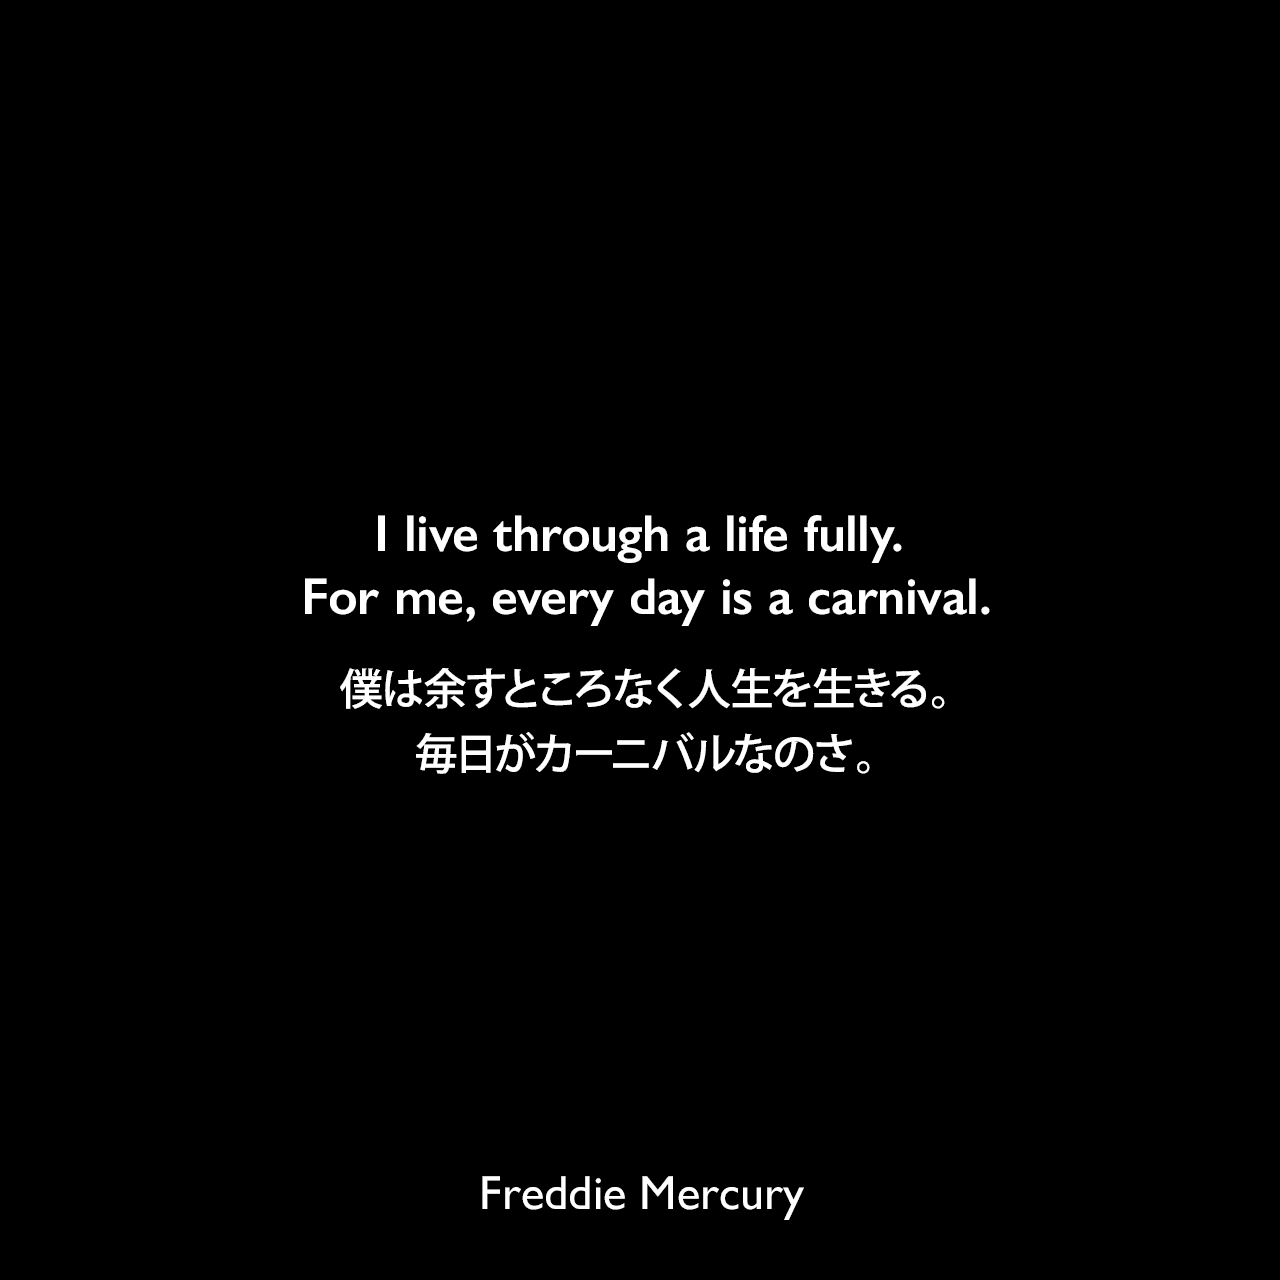 I live through a life fully. For me, every day is a carnival.僕は余すところなく人生を生きる。毎日がカーニバルなのさ。Freddie Mercury